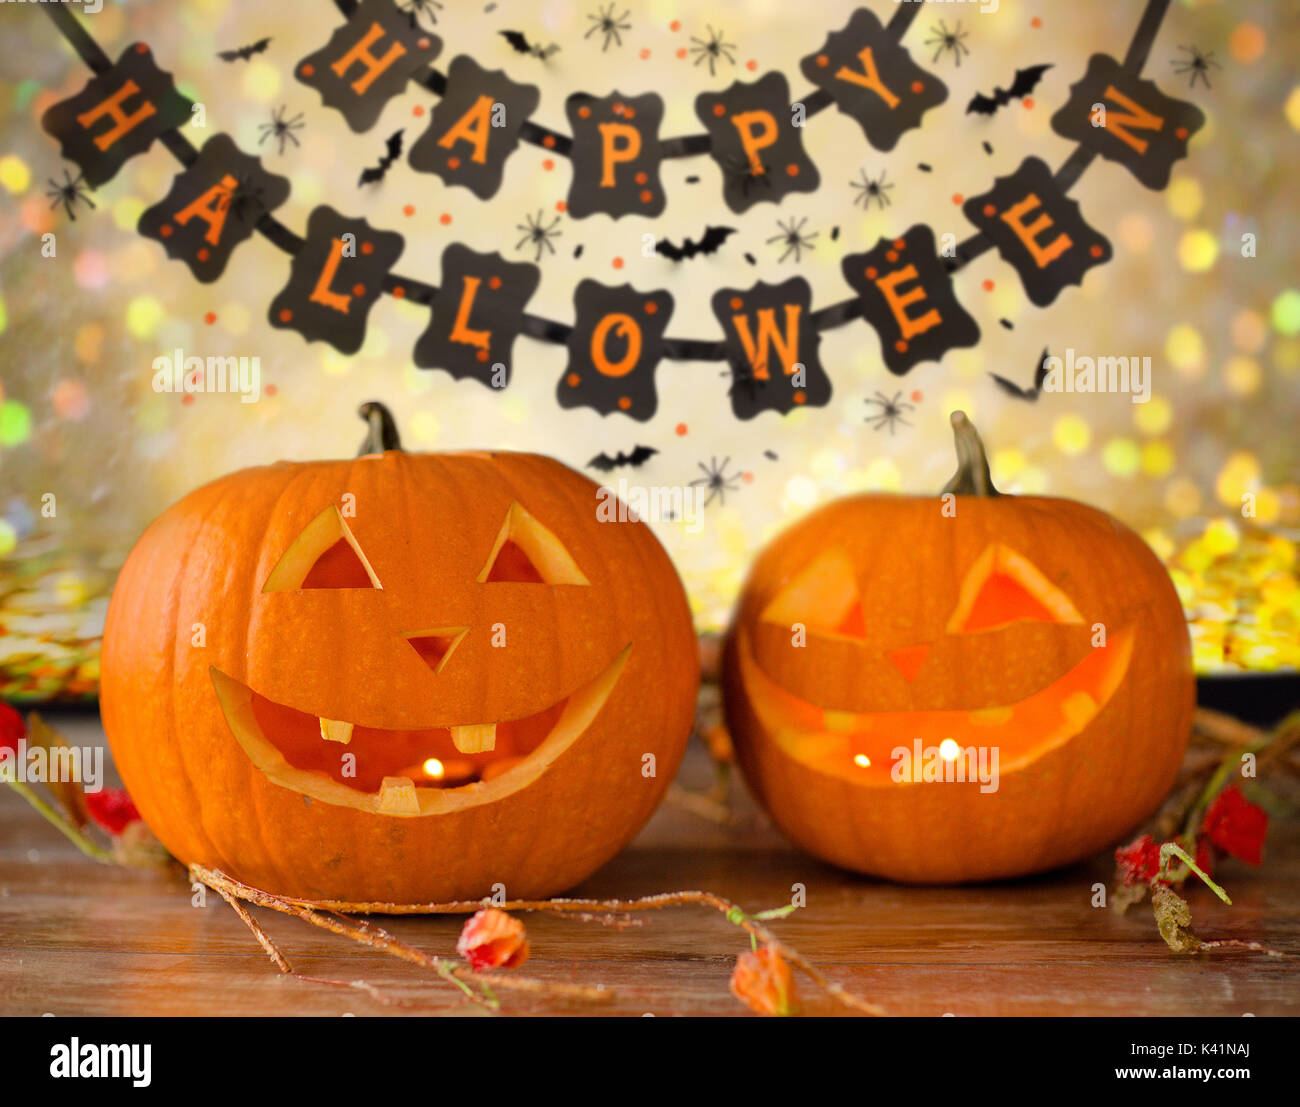 carved pumpkins and happy halloween garland Stock Photo